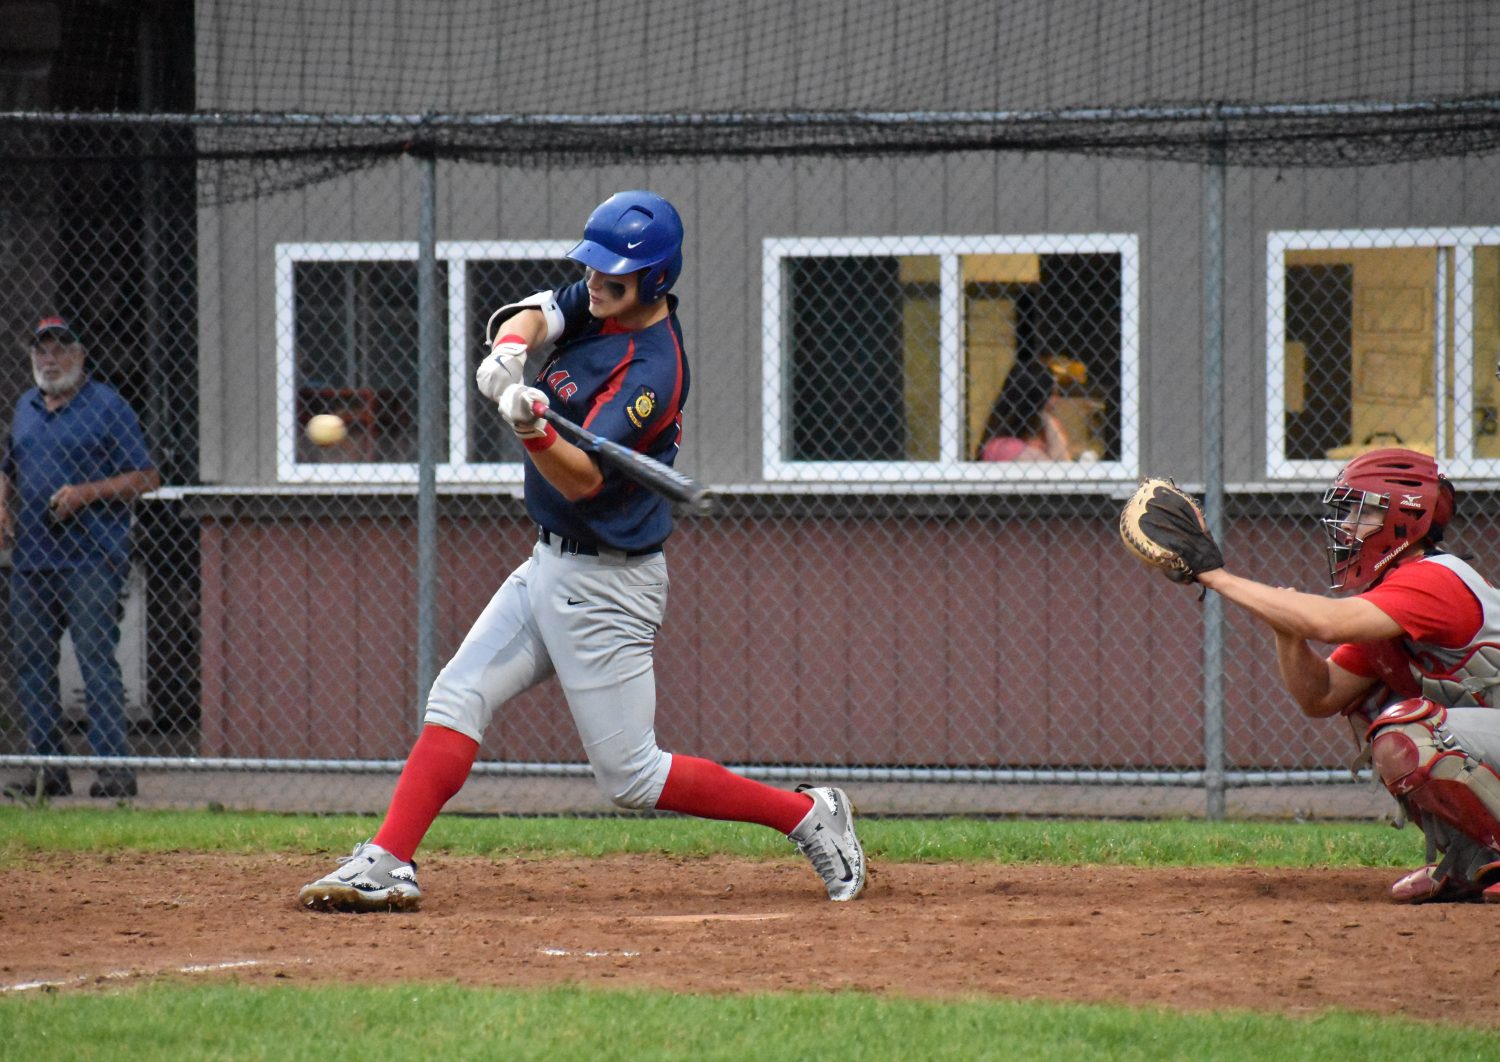 Post 46 continues to slide with double header loss